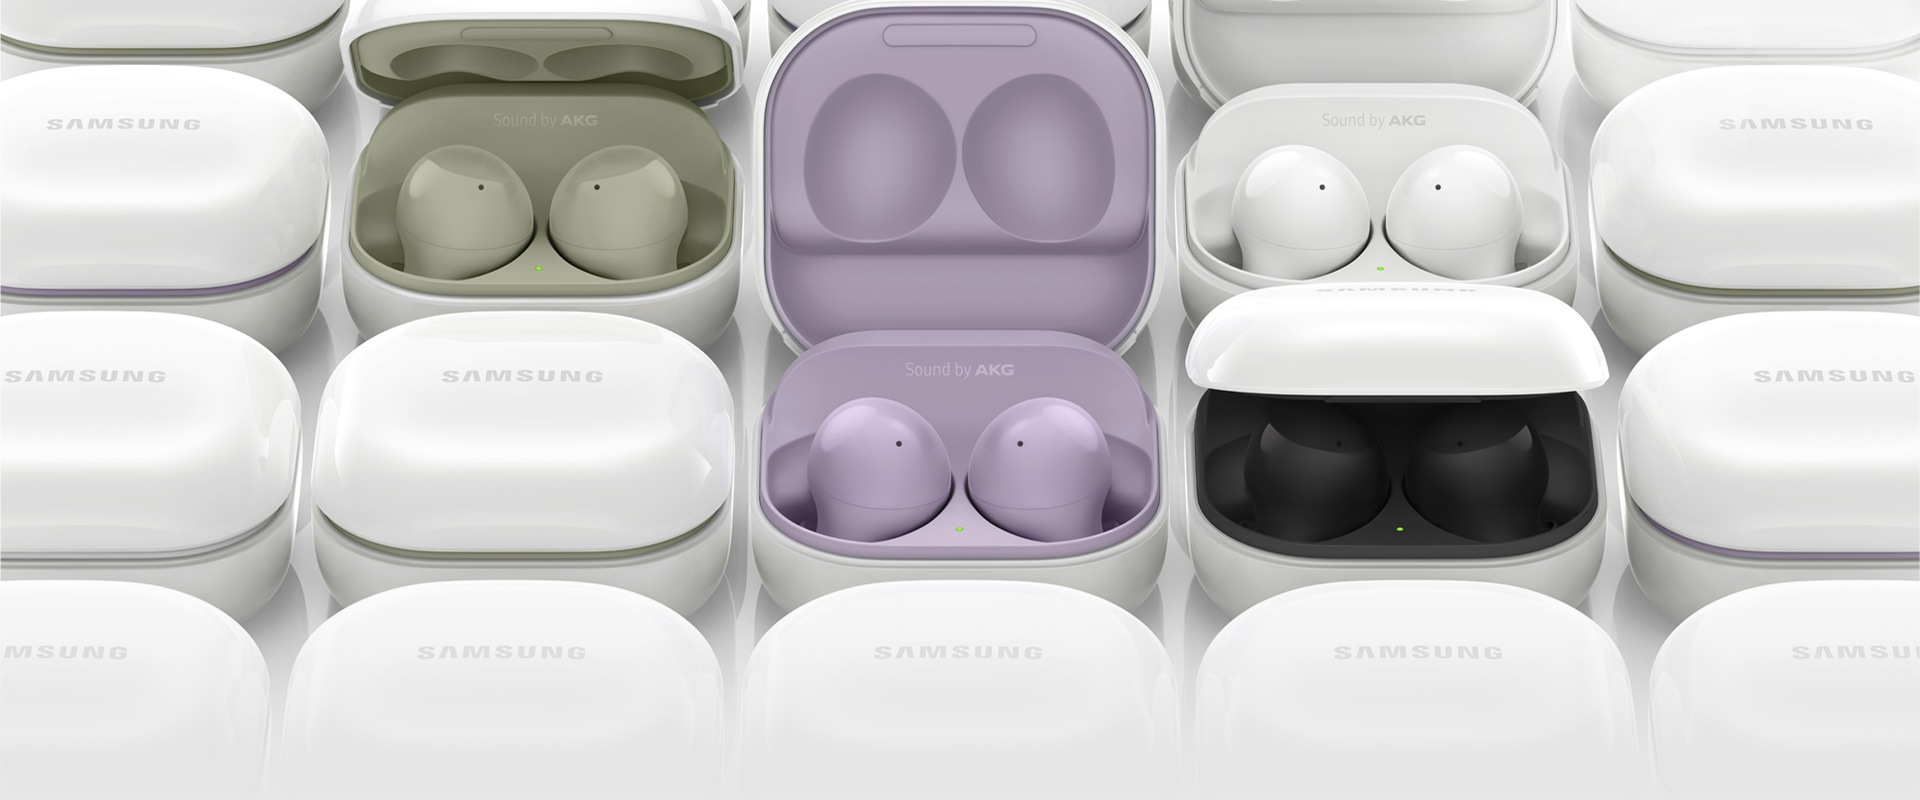 Galaxy Buds2 cases are placed next to each other. Several of the cases are opened, each showing different colors of the inside case, from olive green, lavender, white, to black.